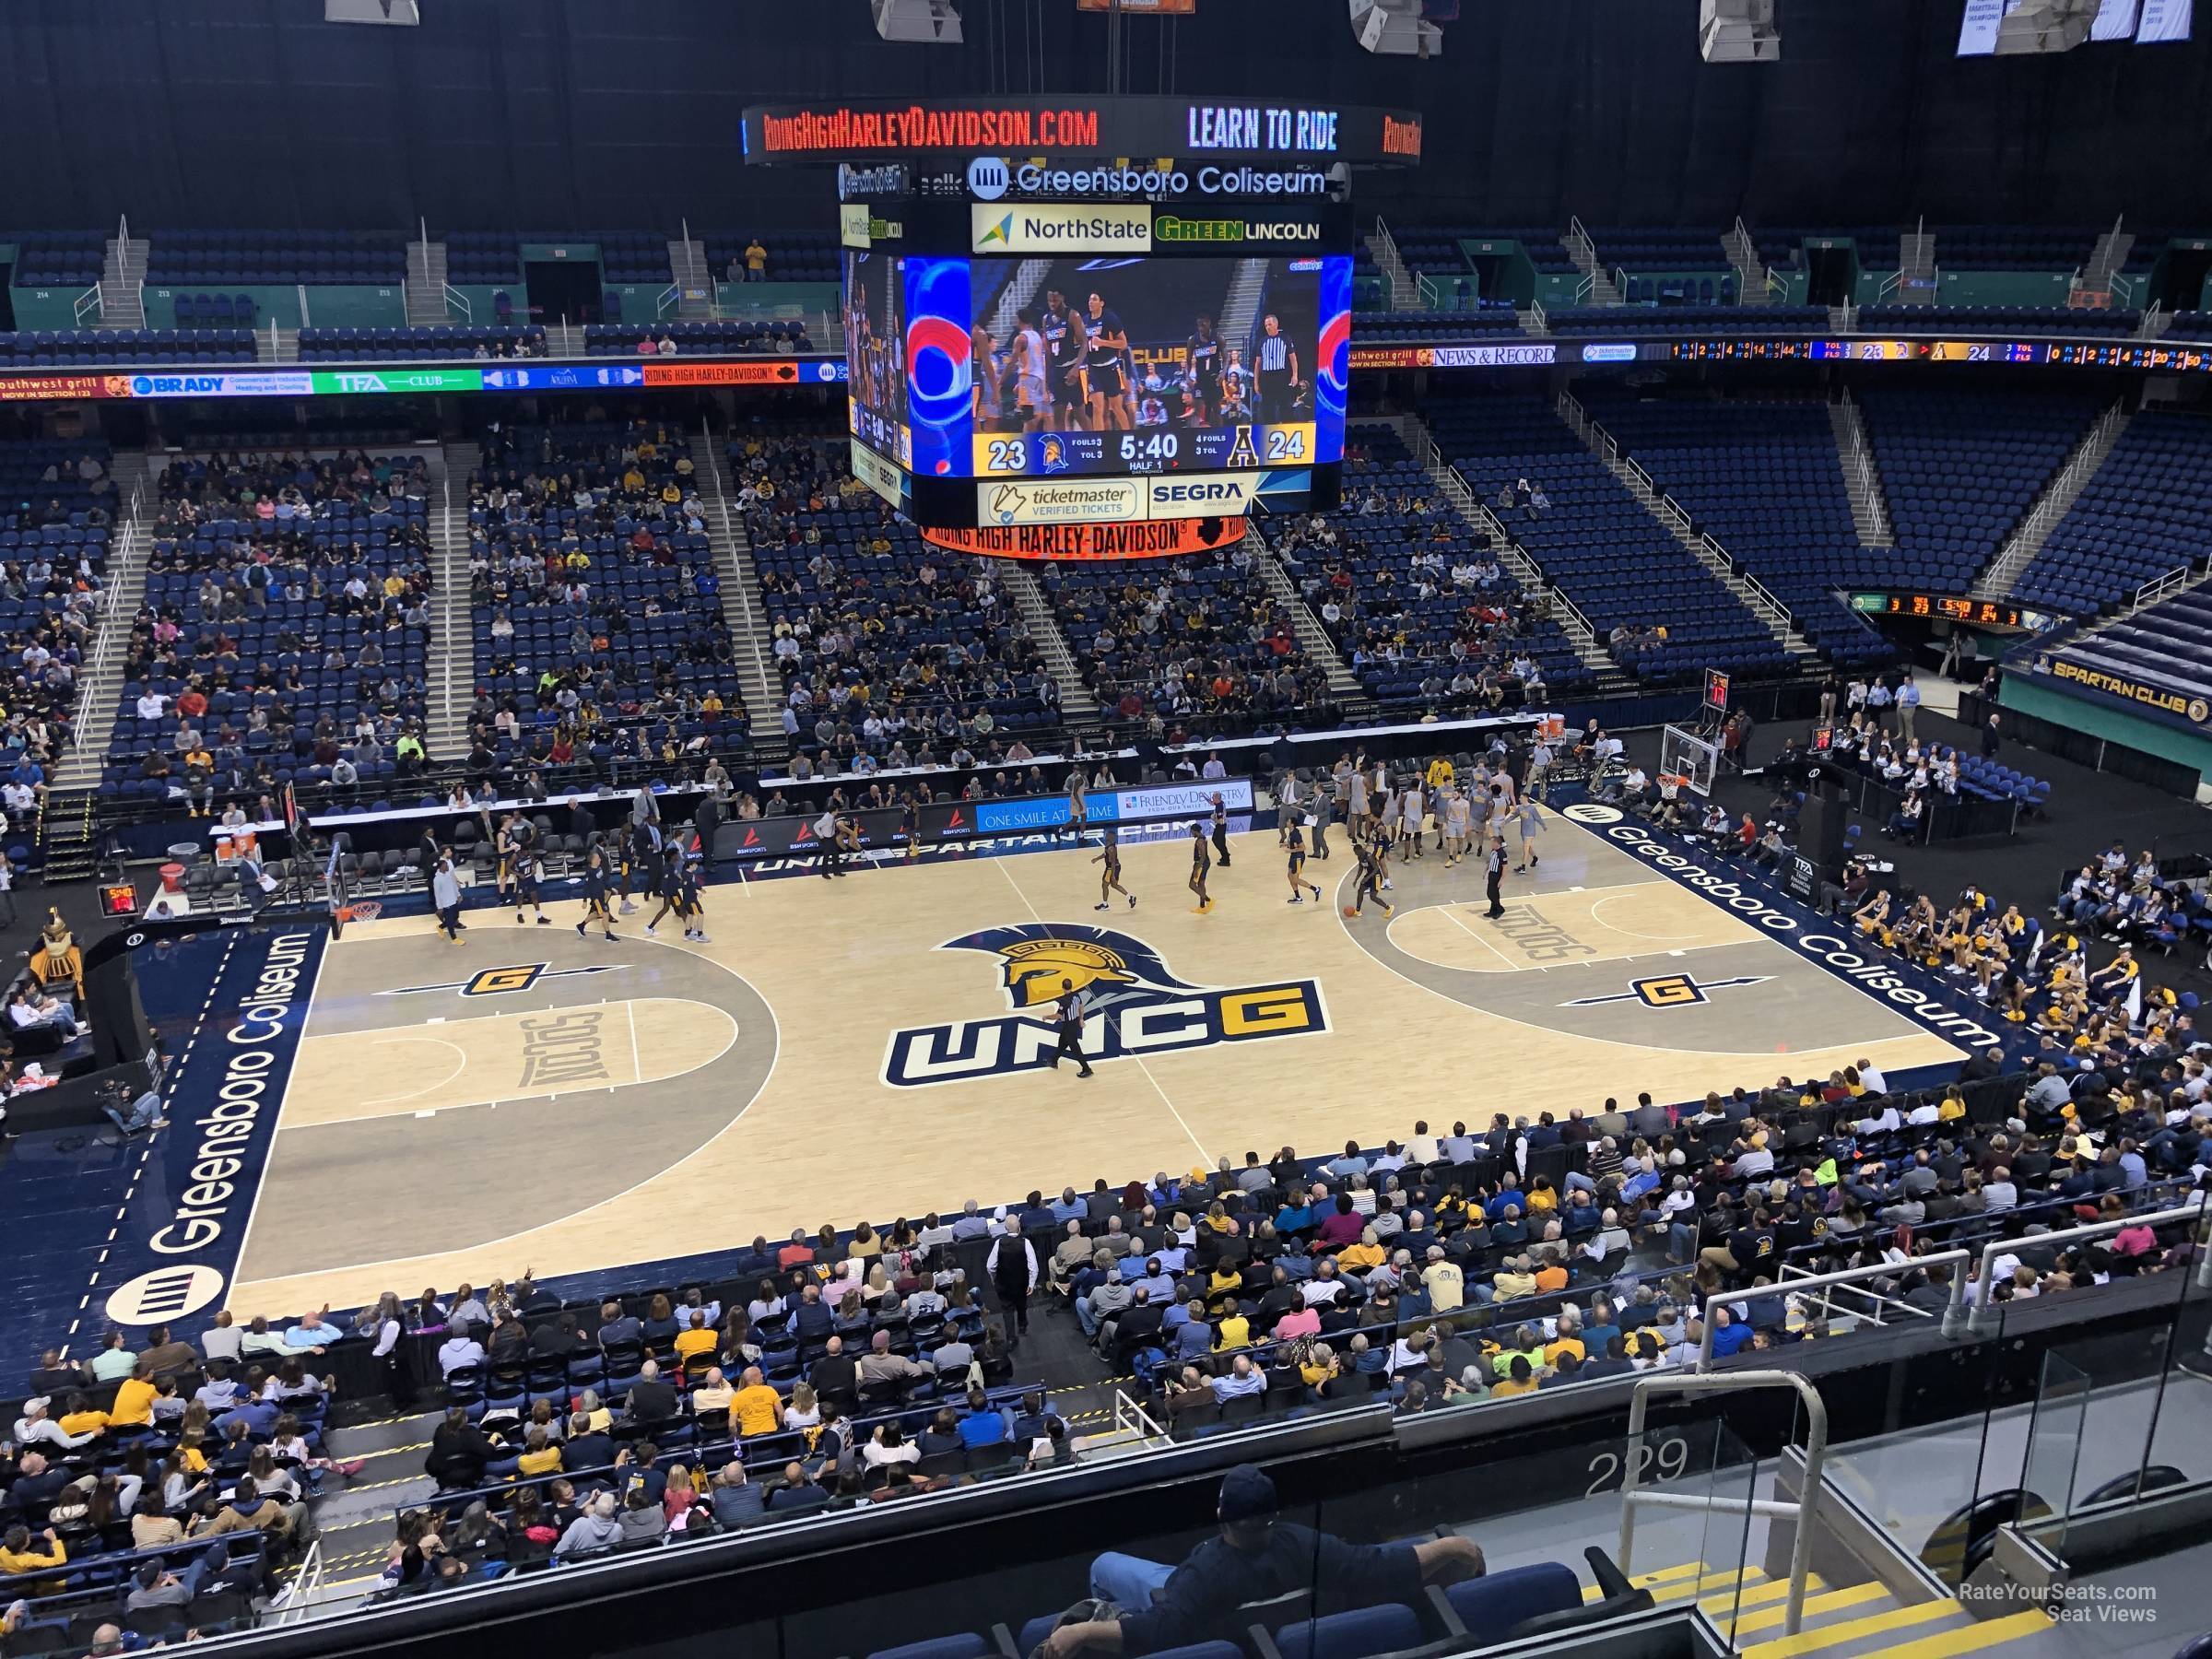 section 230, row g seat view  for basketball - greensboro coliseum